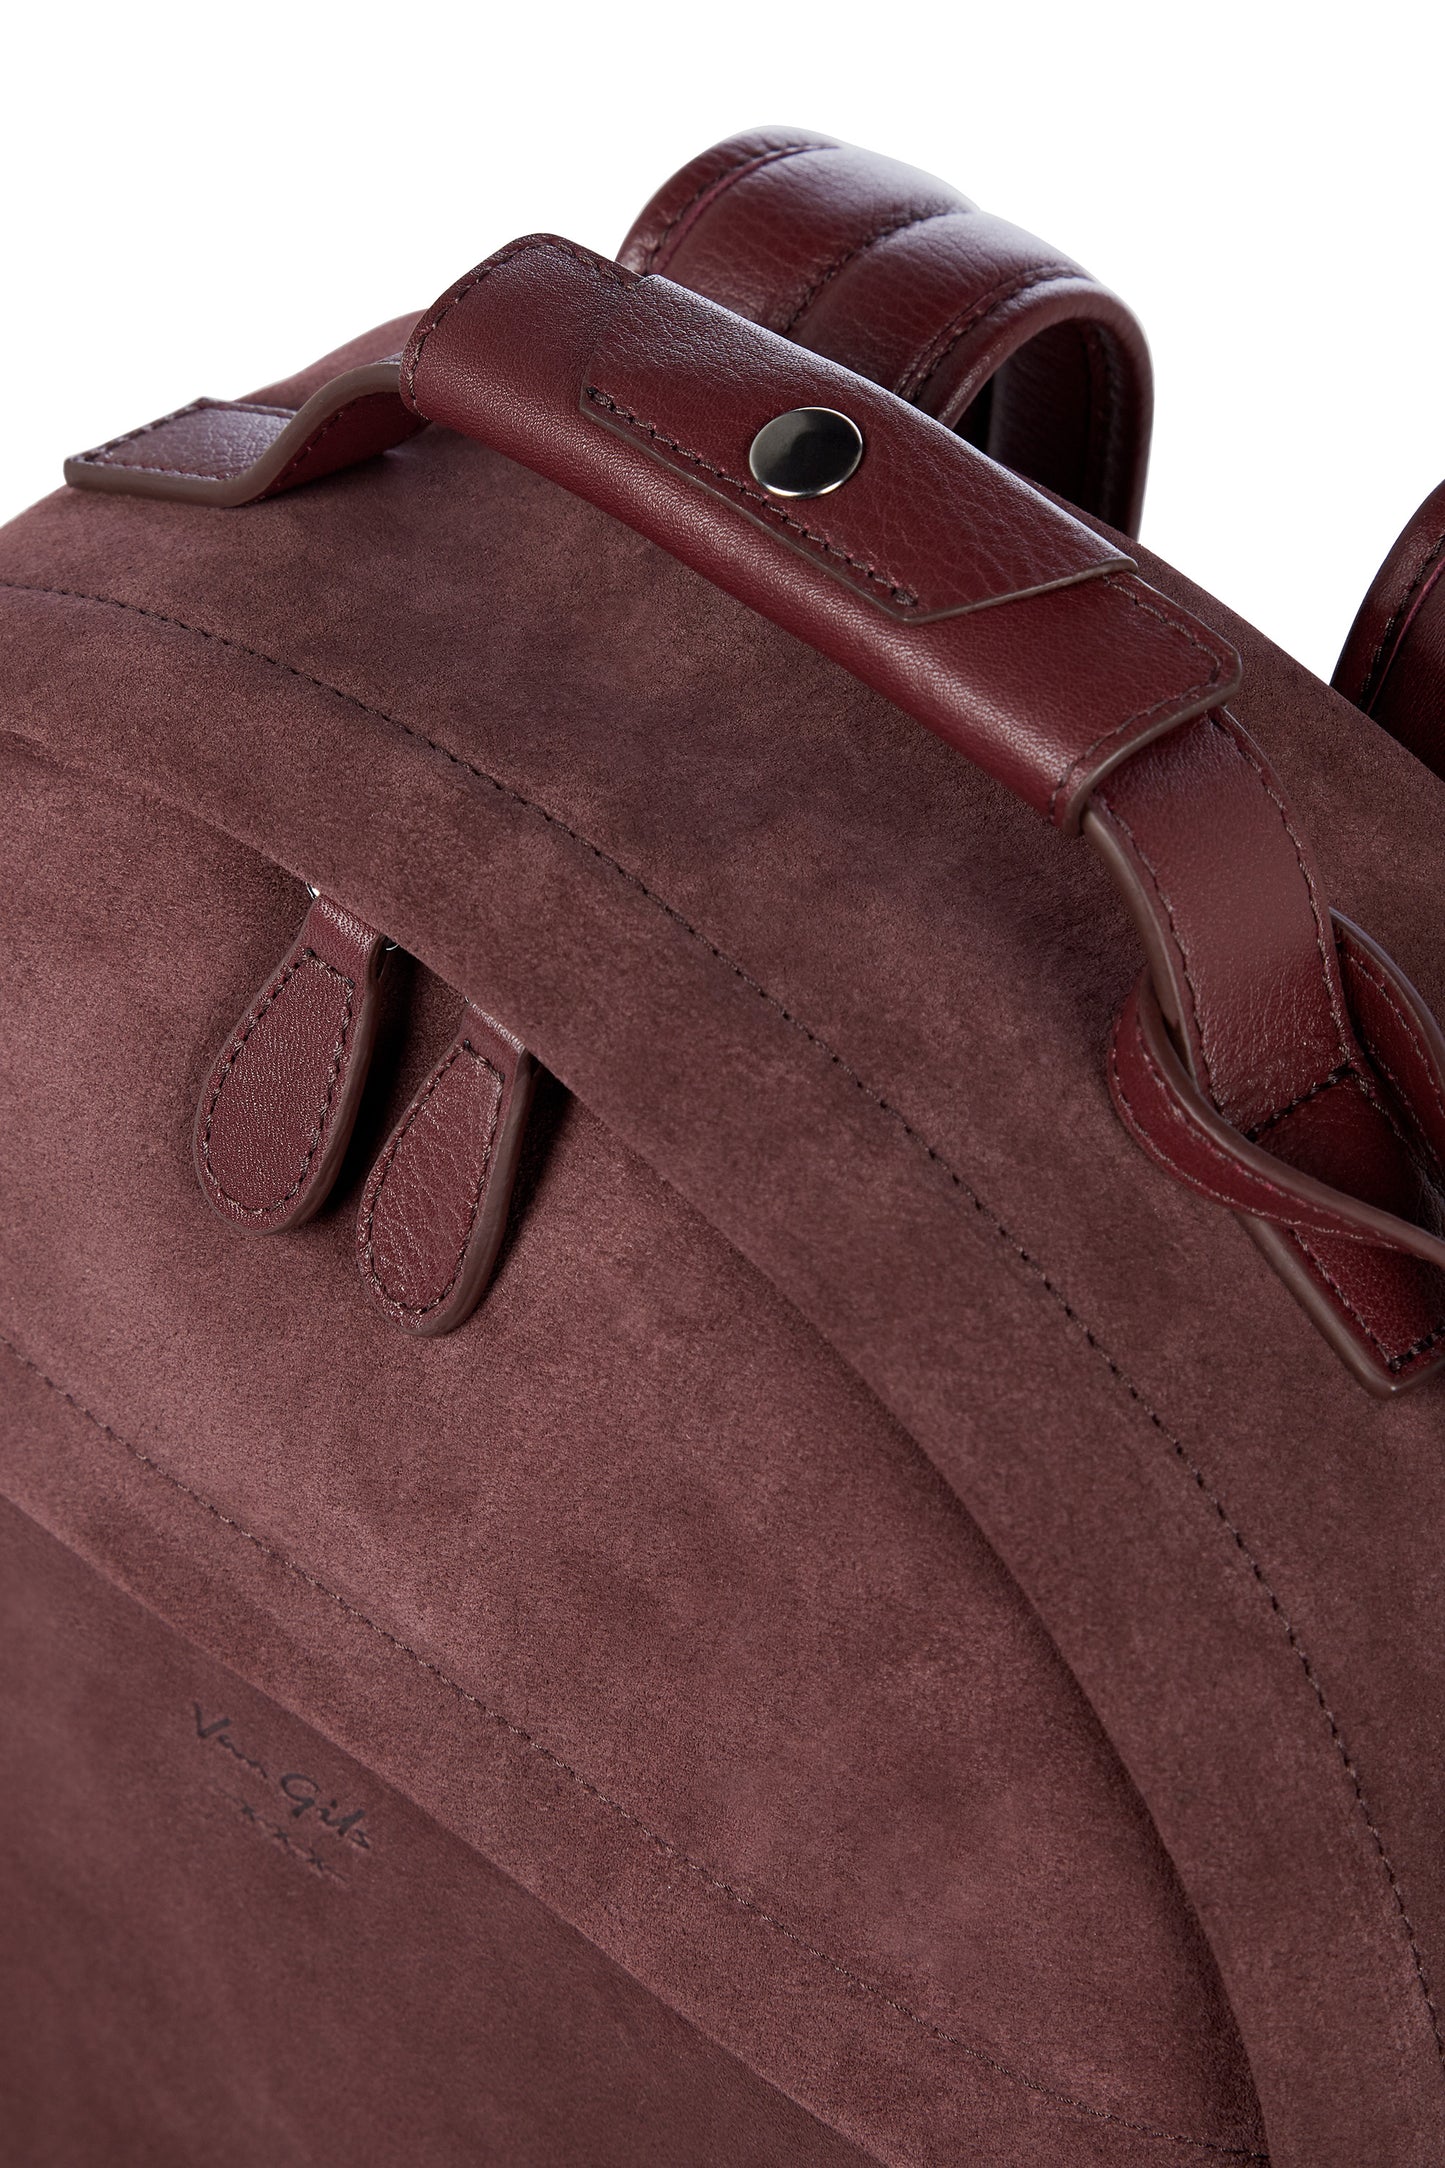 Men's dark red suede backpack with a soft cotton lining from Van Gils Fashion at StylishGuy Menswear Dublin